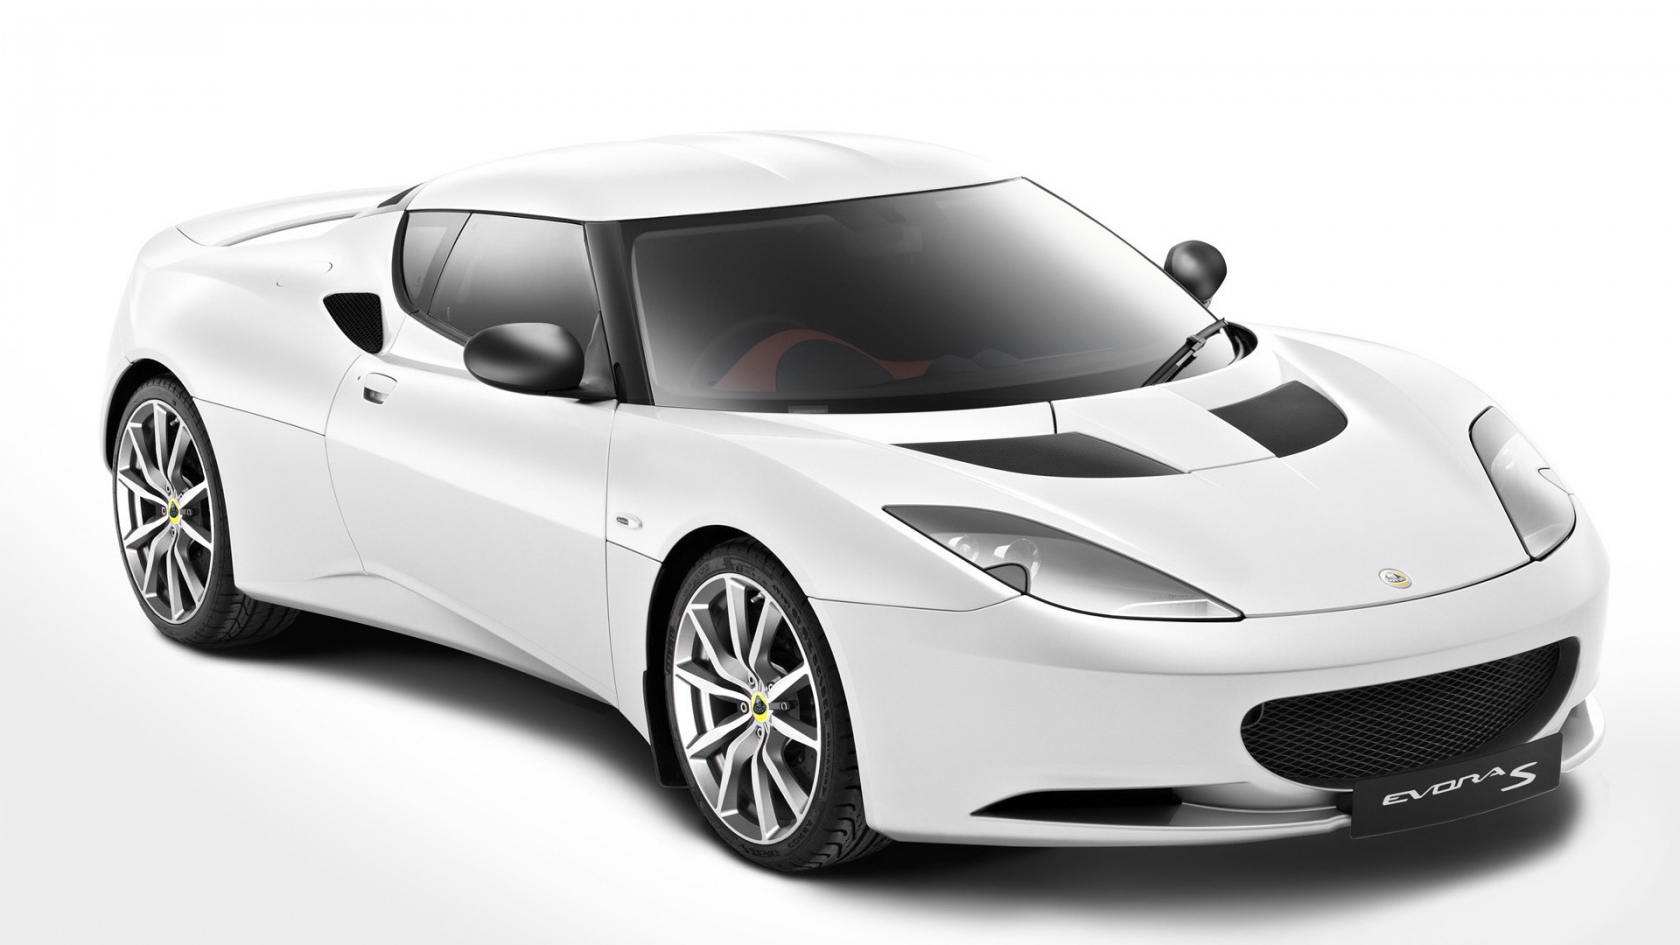 Lotus Evora S 2011 Front Angle for 1680 x 945 HDTV resolution